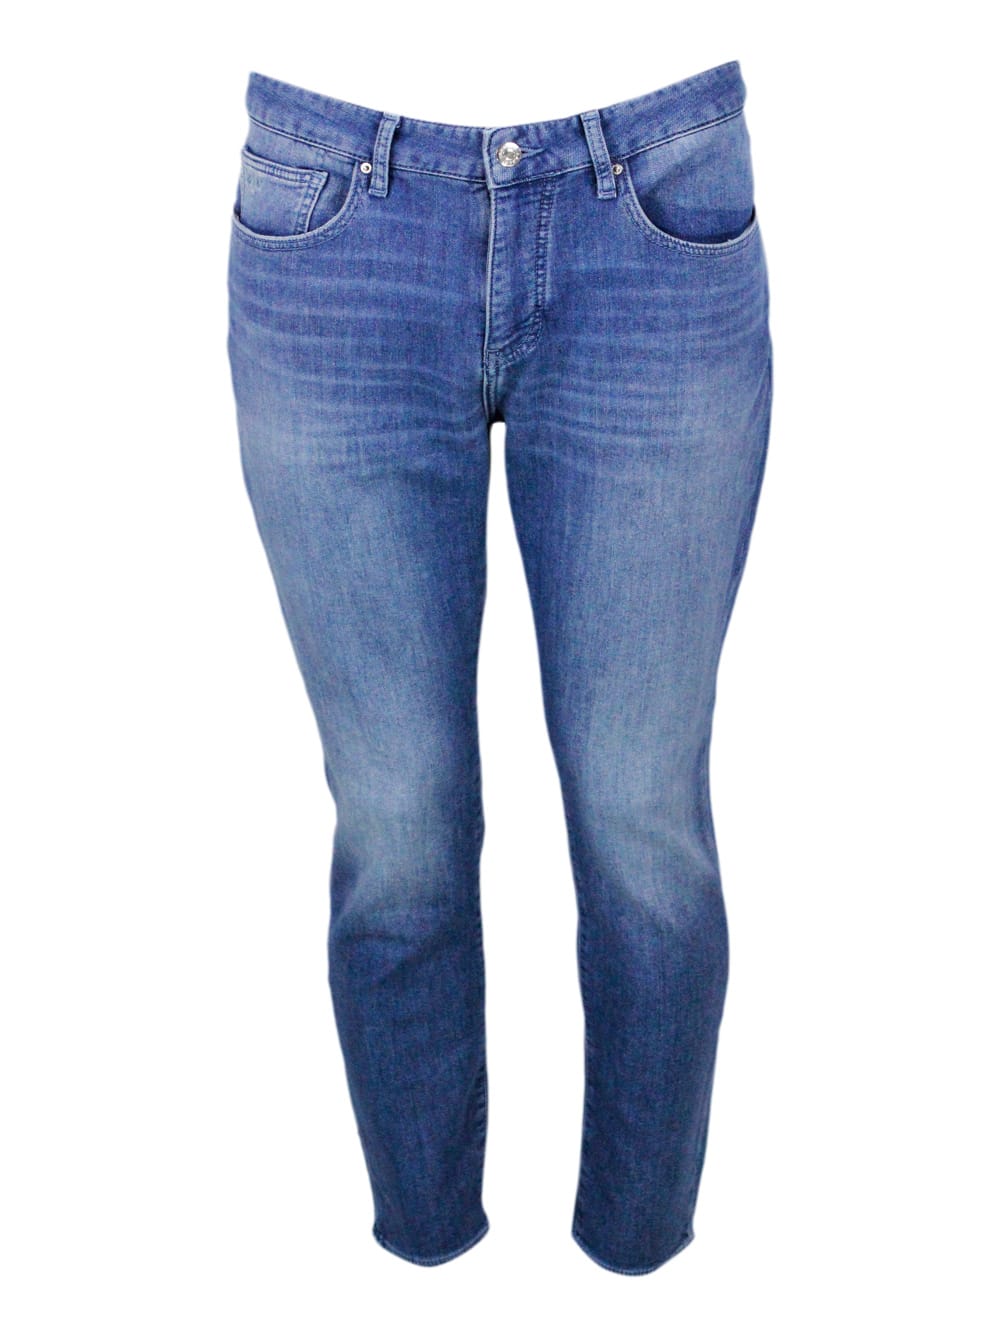 Armani Collezioni Skinny Jeans In Soft Stretch Denim With Matching Stitching And Leather Tab. Zip And Button Closure